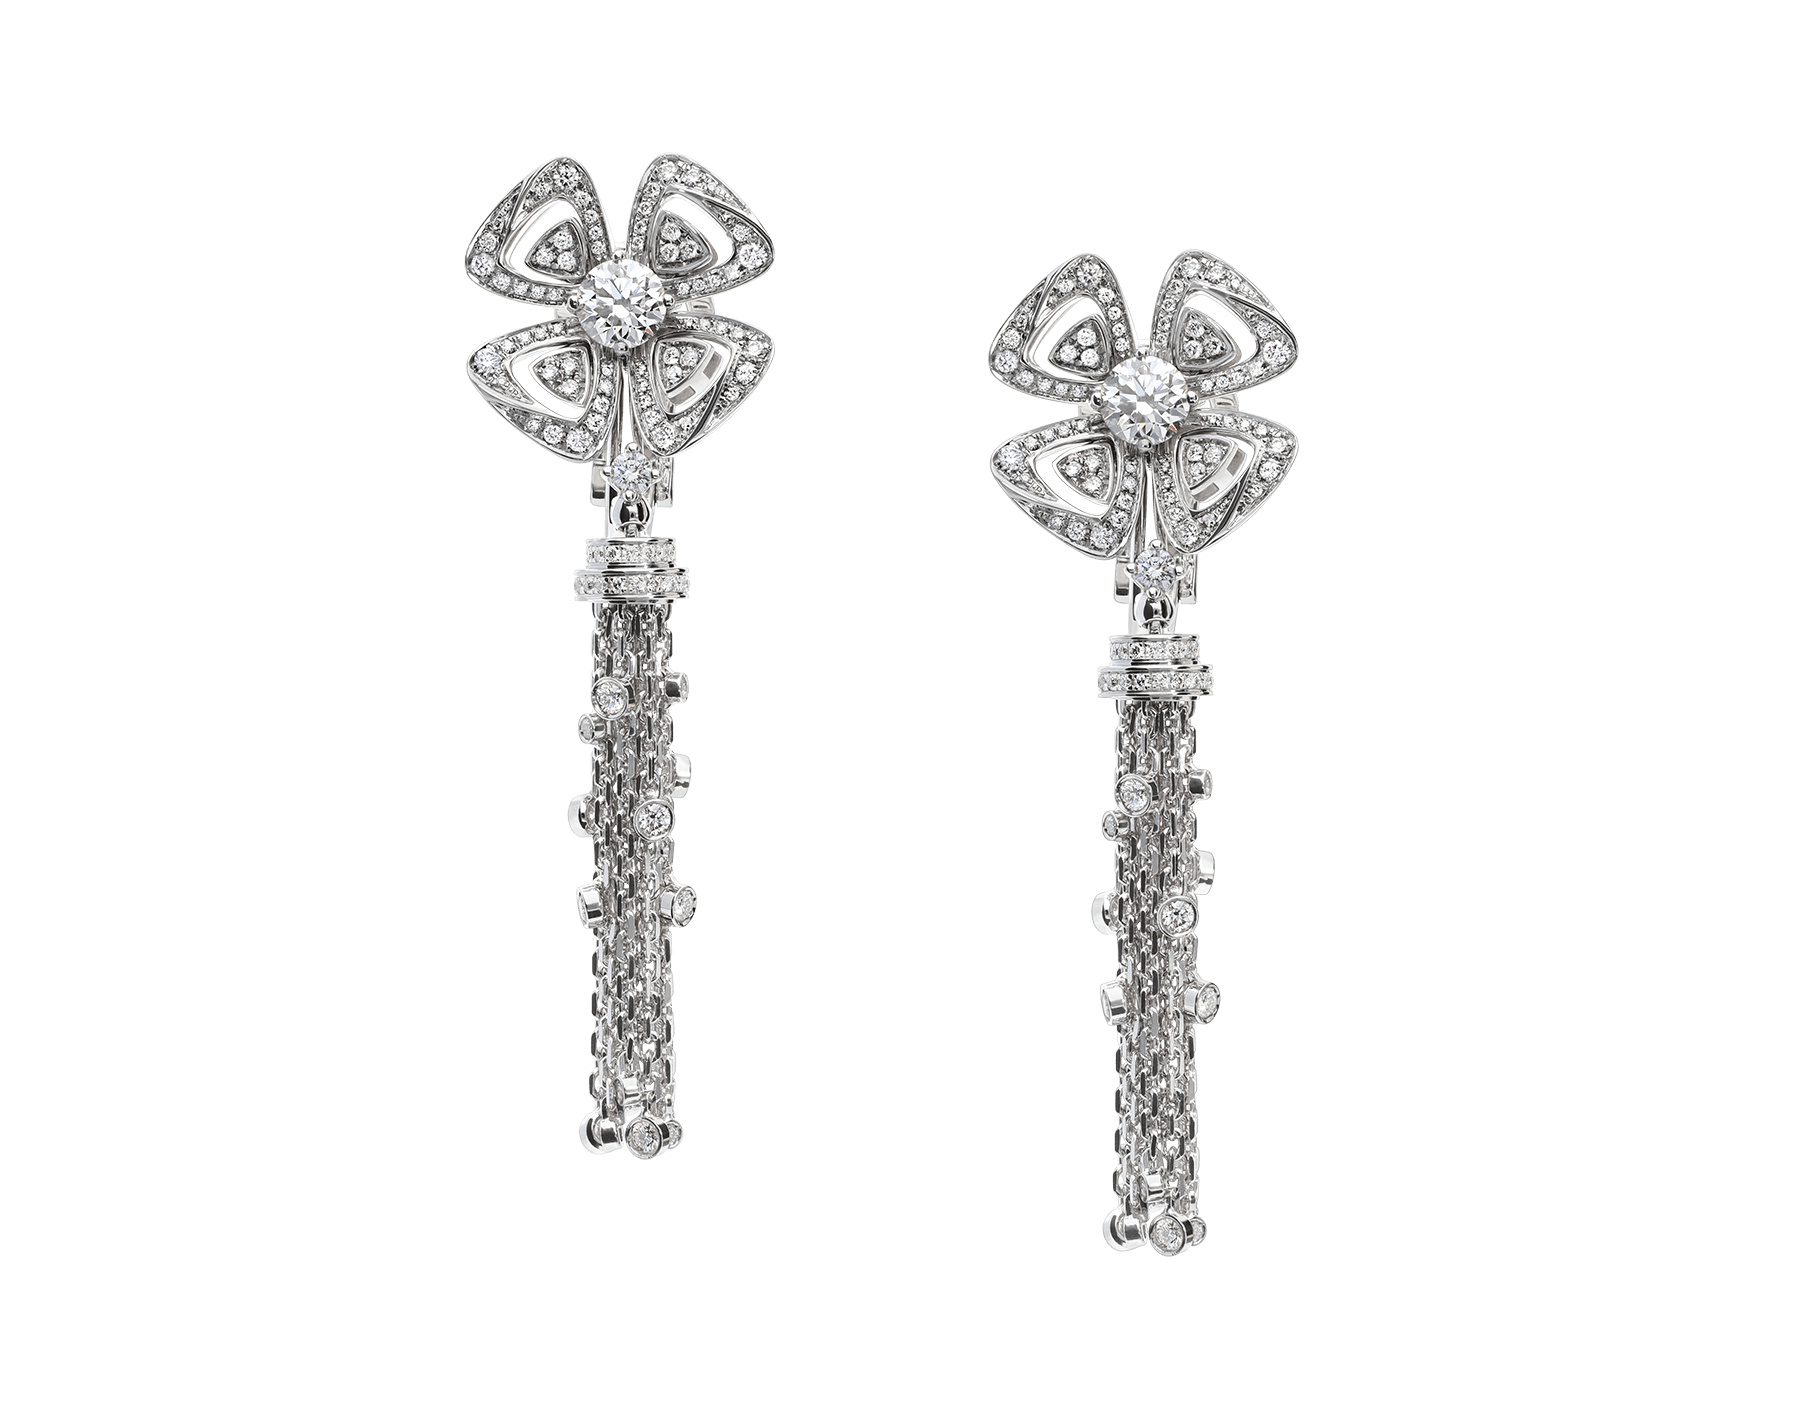 Fiorever 18 kt white gold earrings, set with two central diamonds and pavé diamonds. 354528 image 1